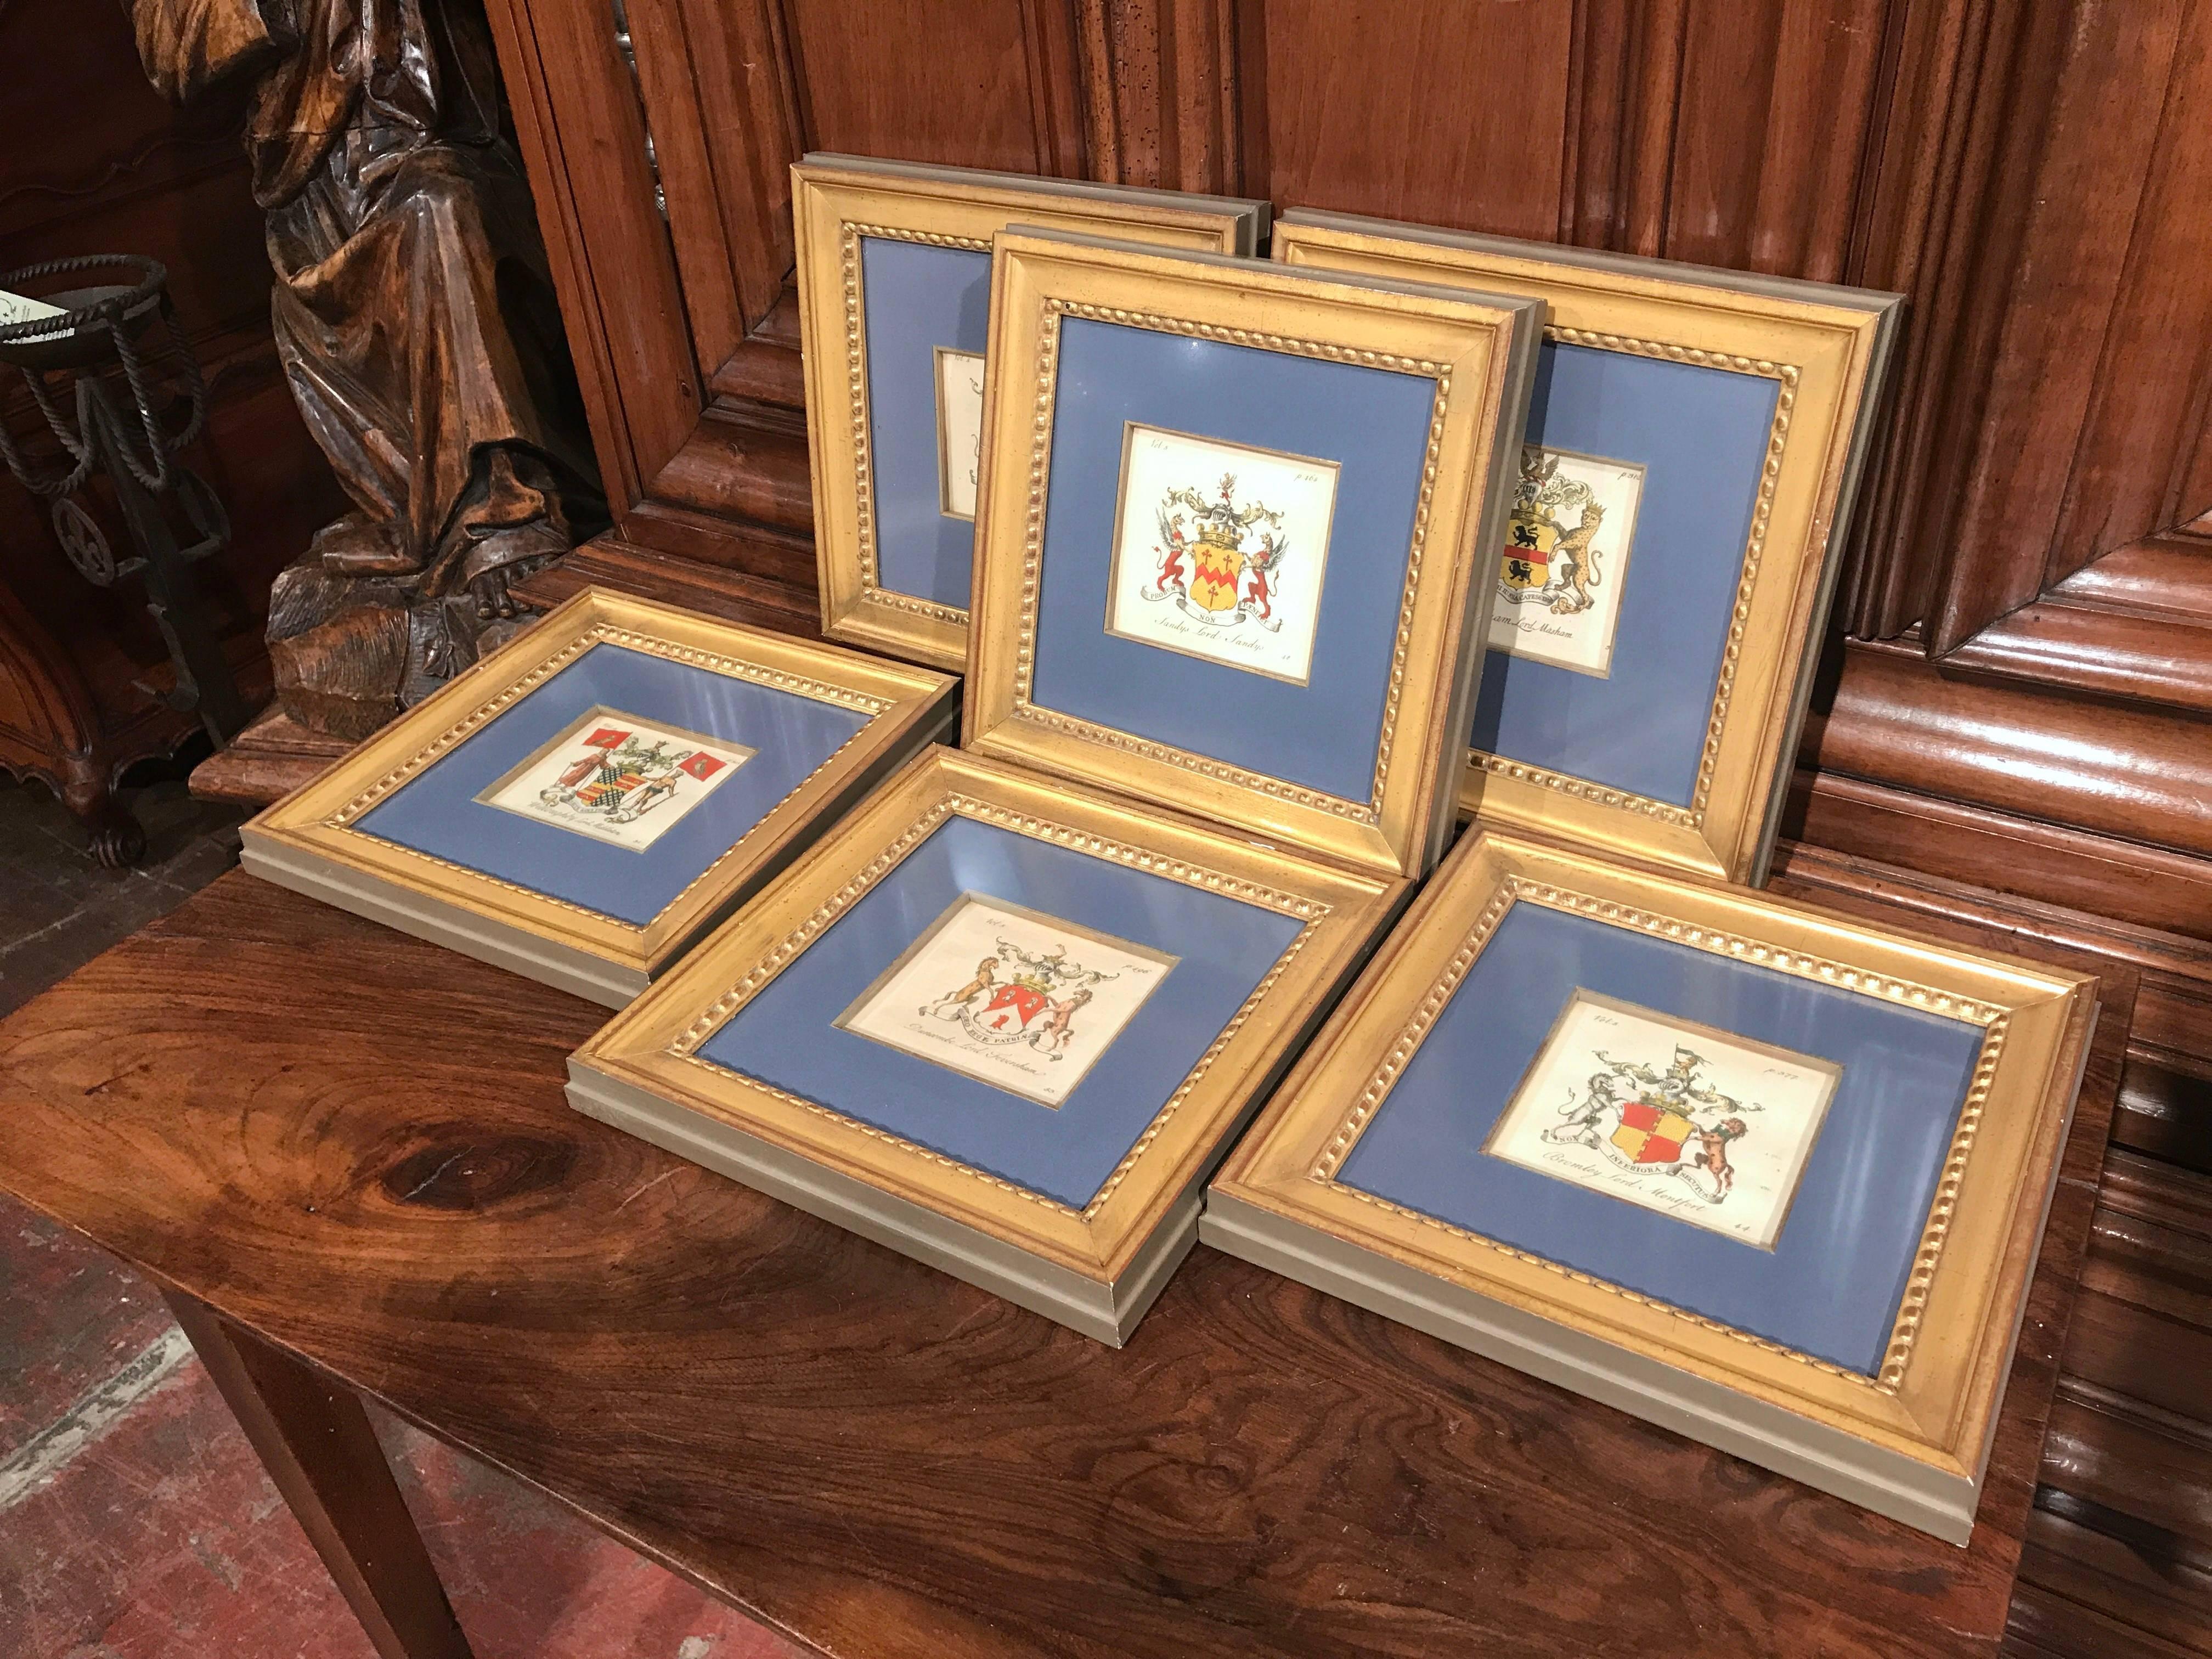 Decorate your study with this elegant set of framed coat of arms etchings. Crafted in England circa 1860, each square hand-painted crest represents a well-known Lord's last name. The family crests include that of Bromley Lord Montfort, Duncombe Lord